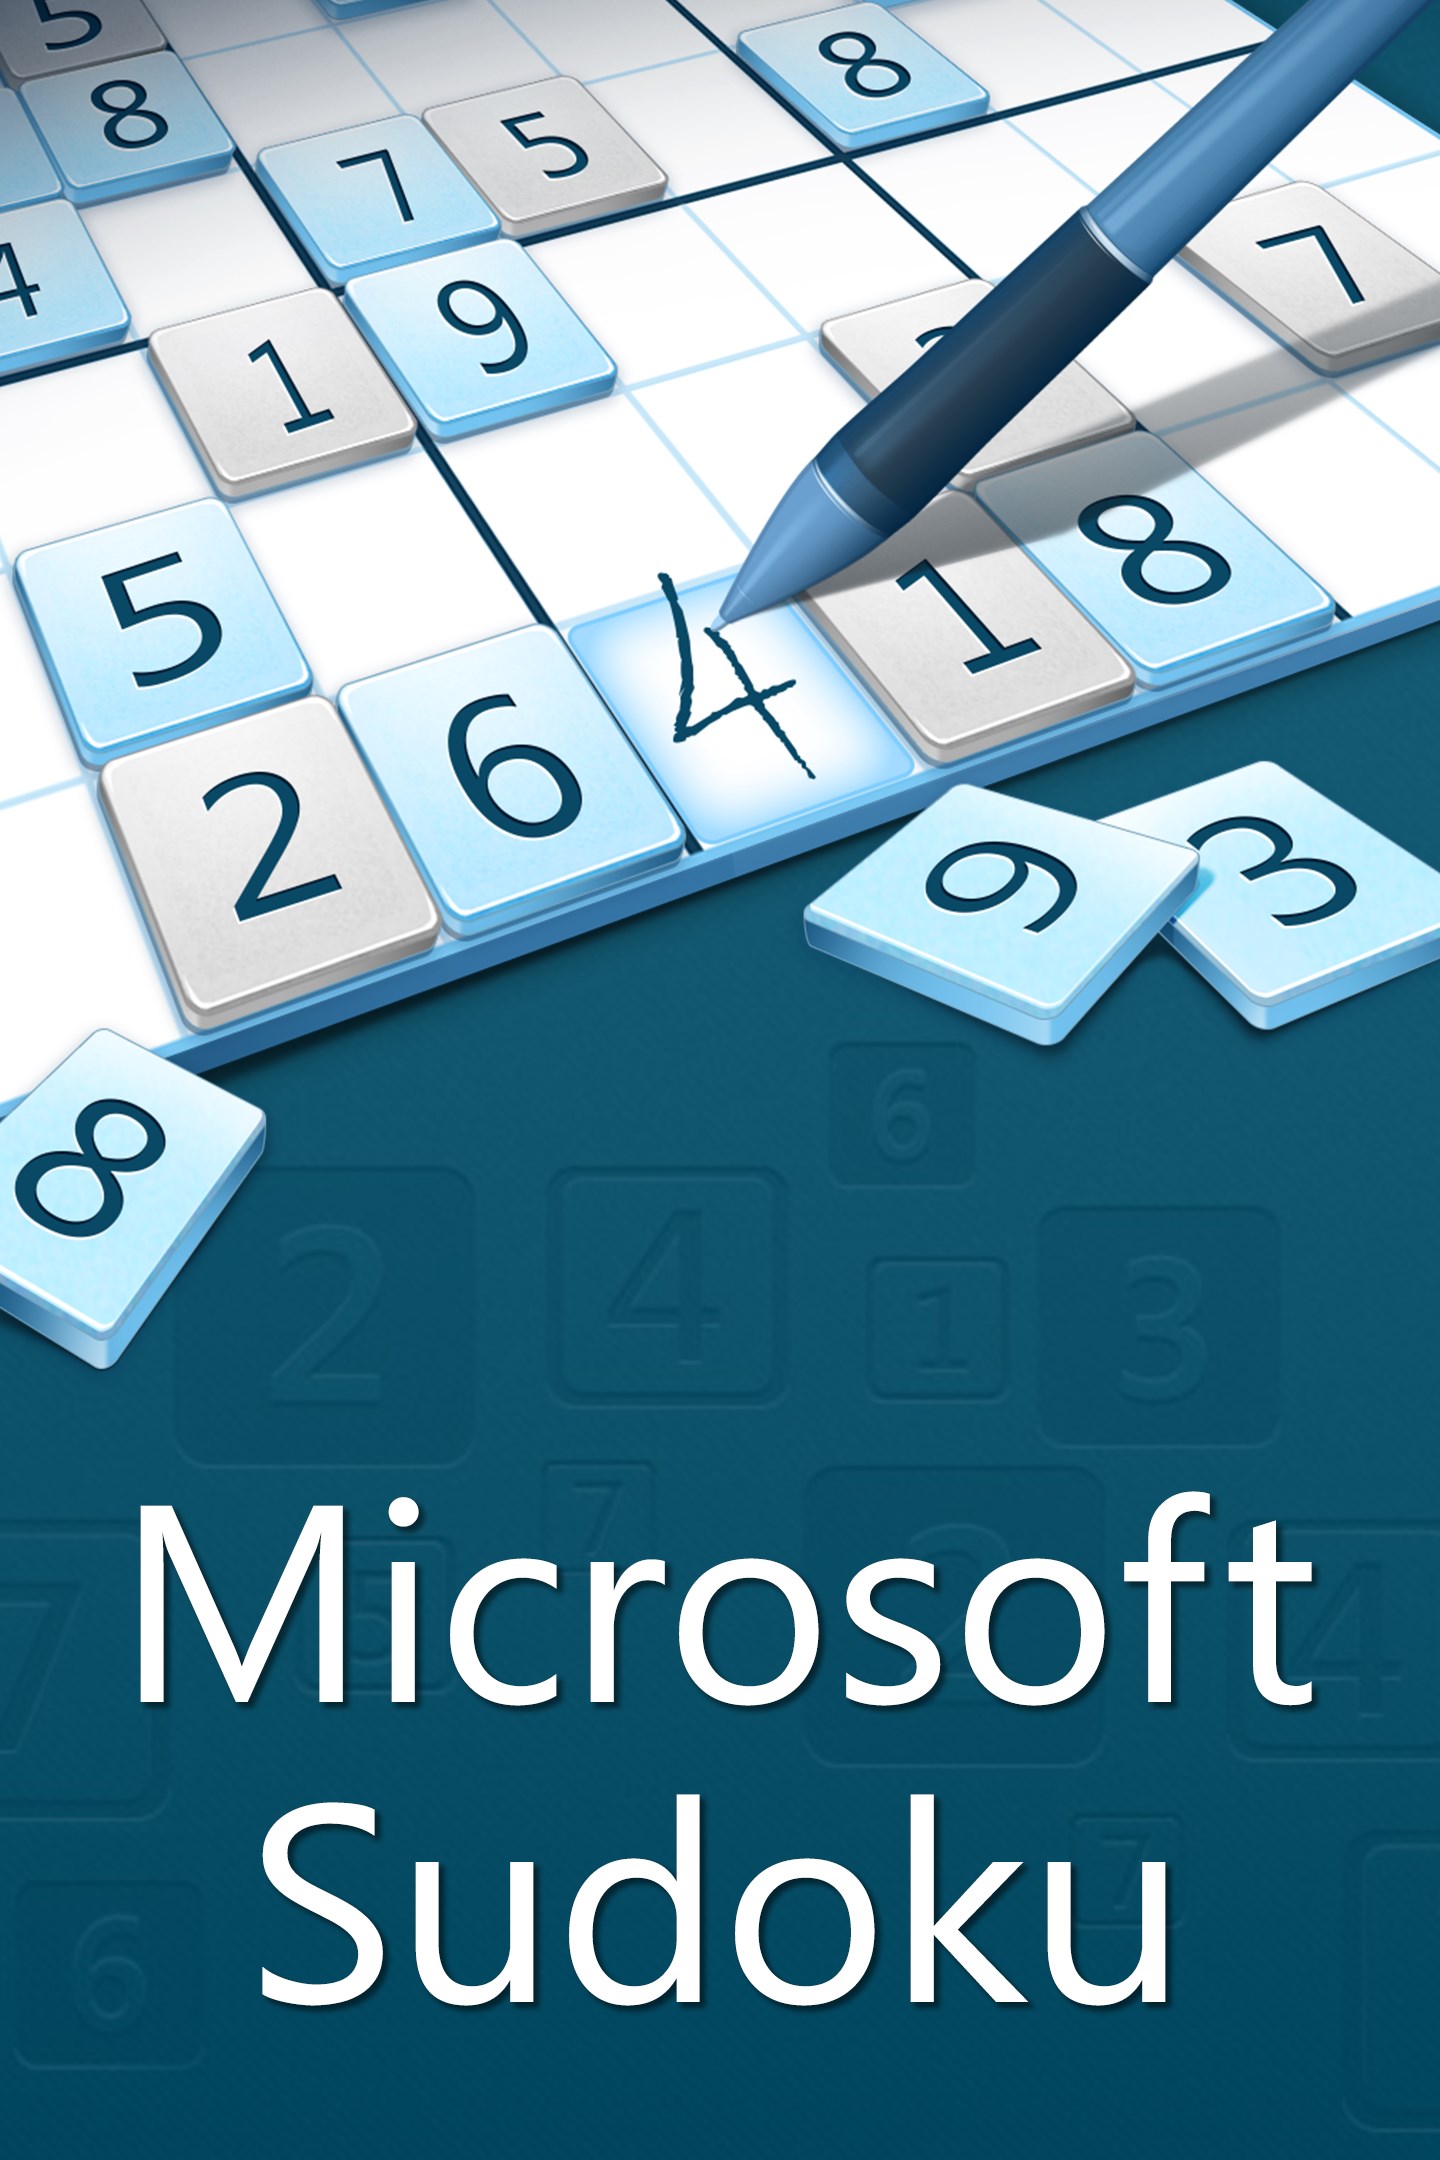 why microsoft sudoku closes in middle of game